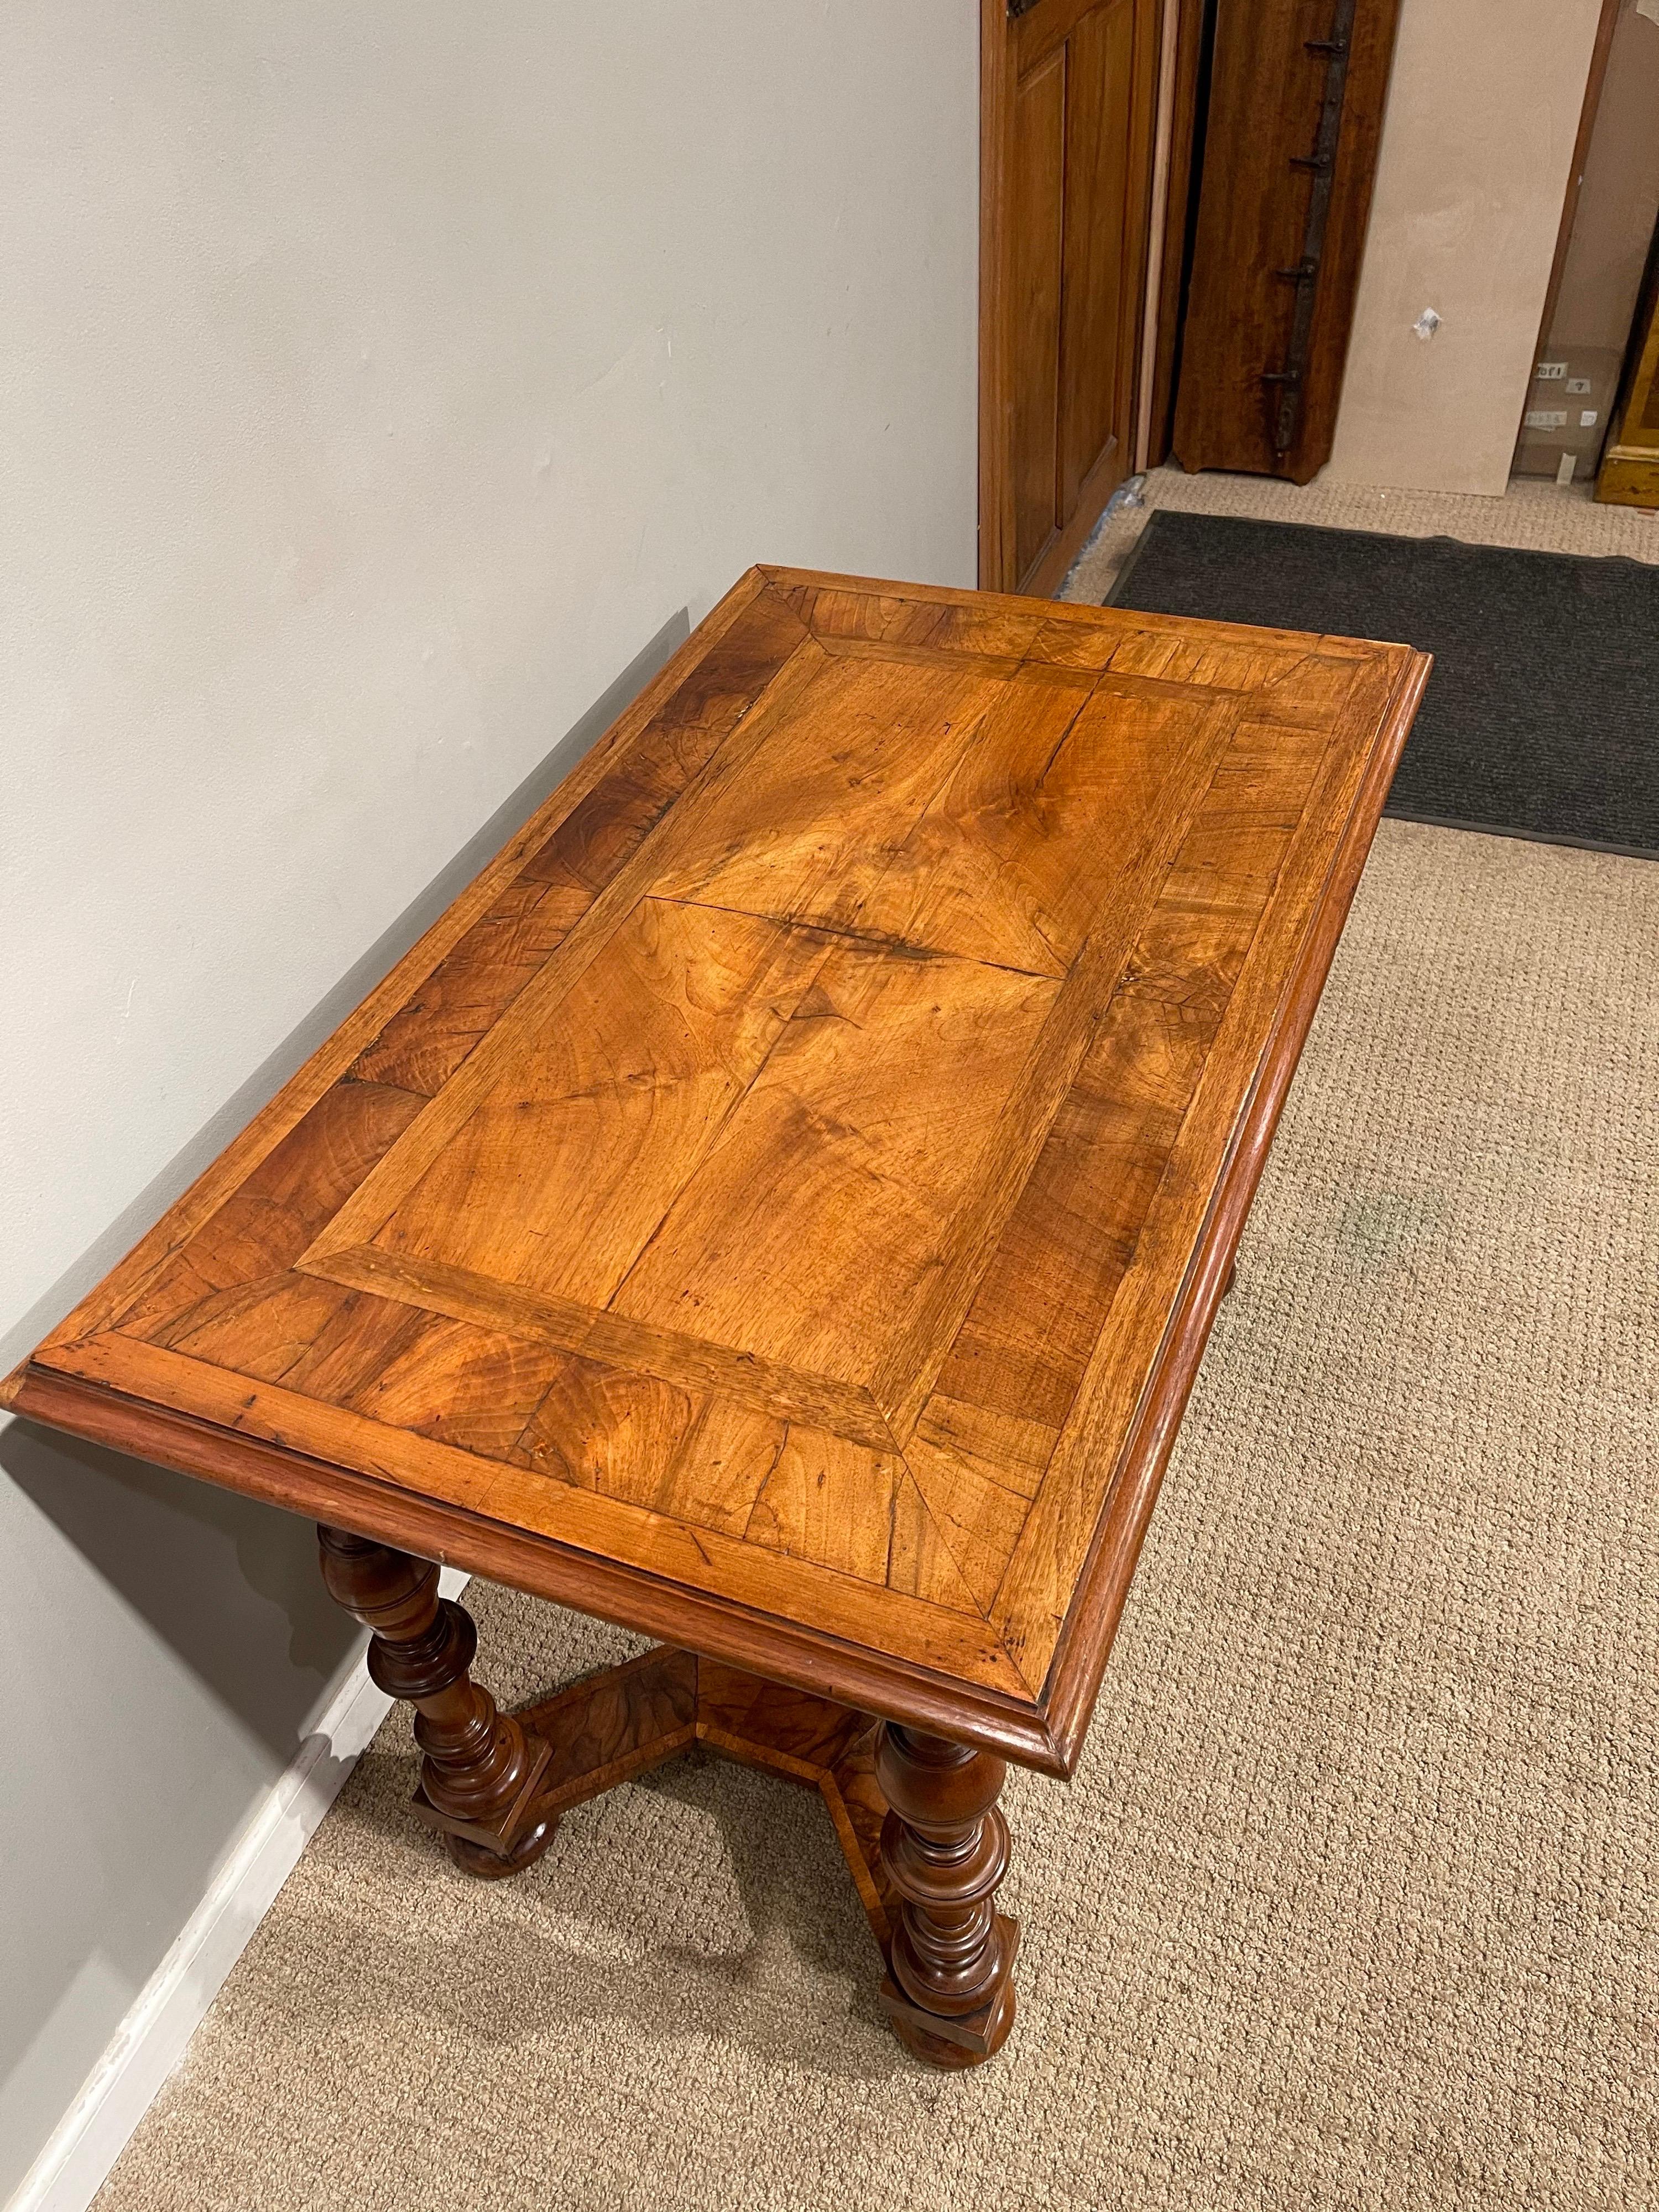 French Provincial Turned Walnut Center Table, Late 17th Century